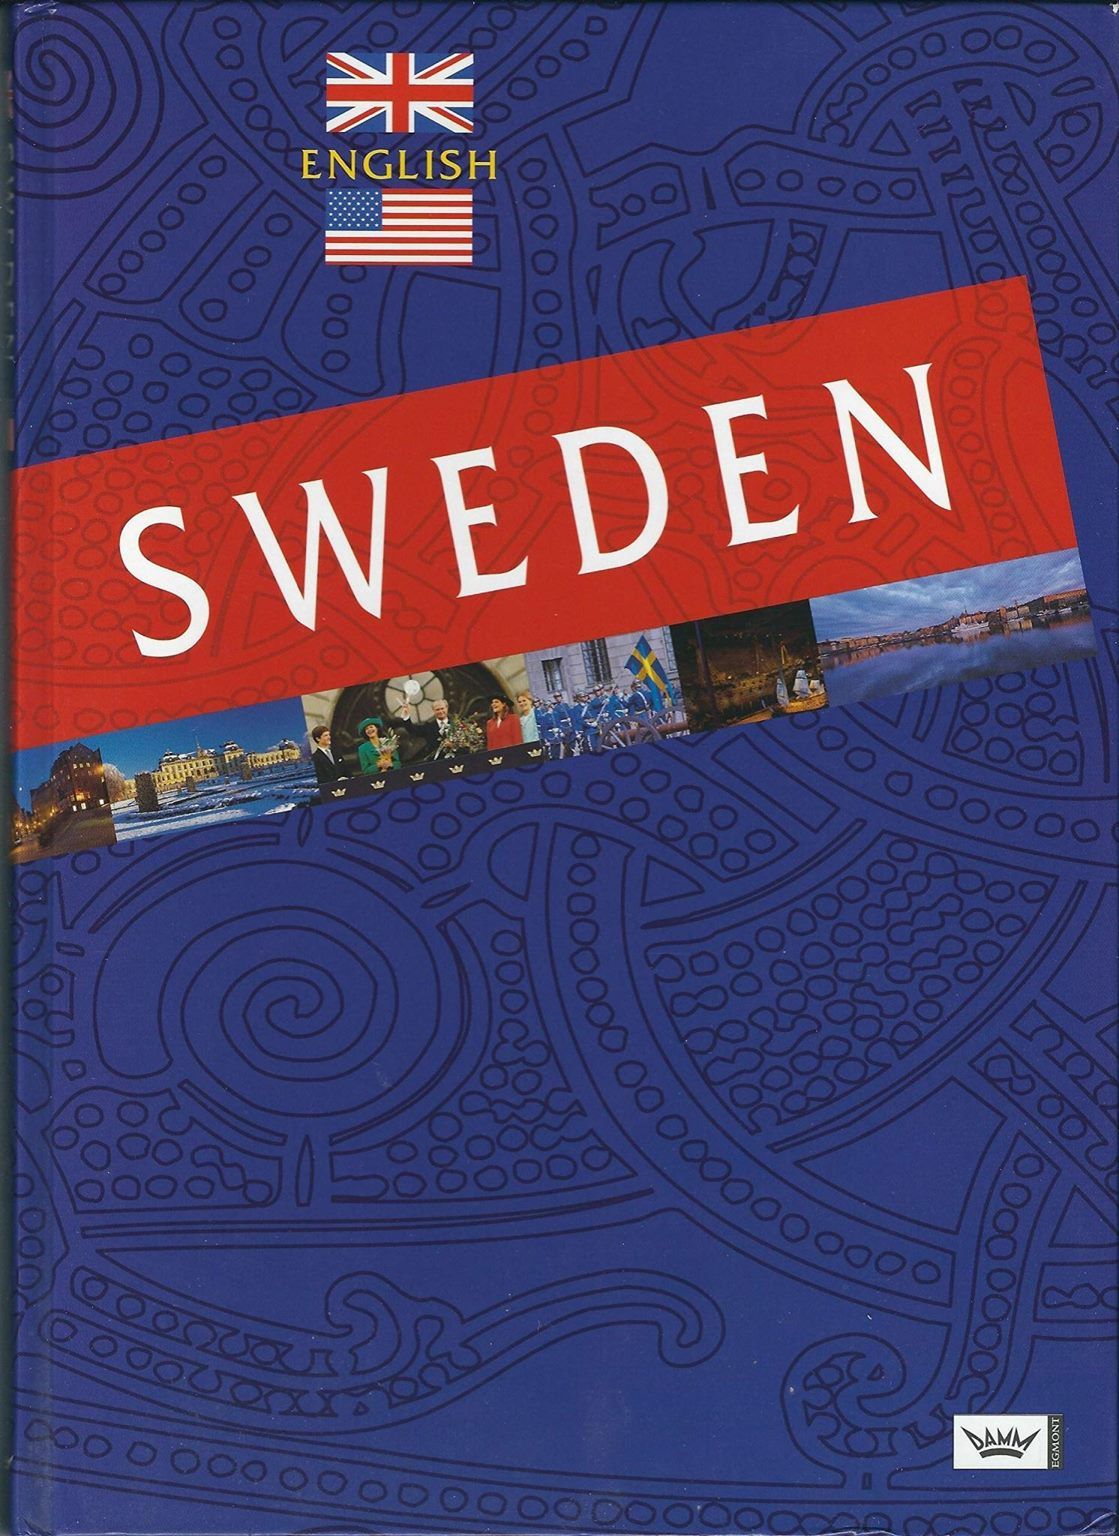 SWEDEN: A small portrait of a small country